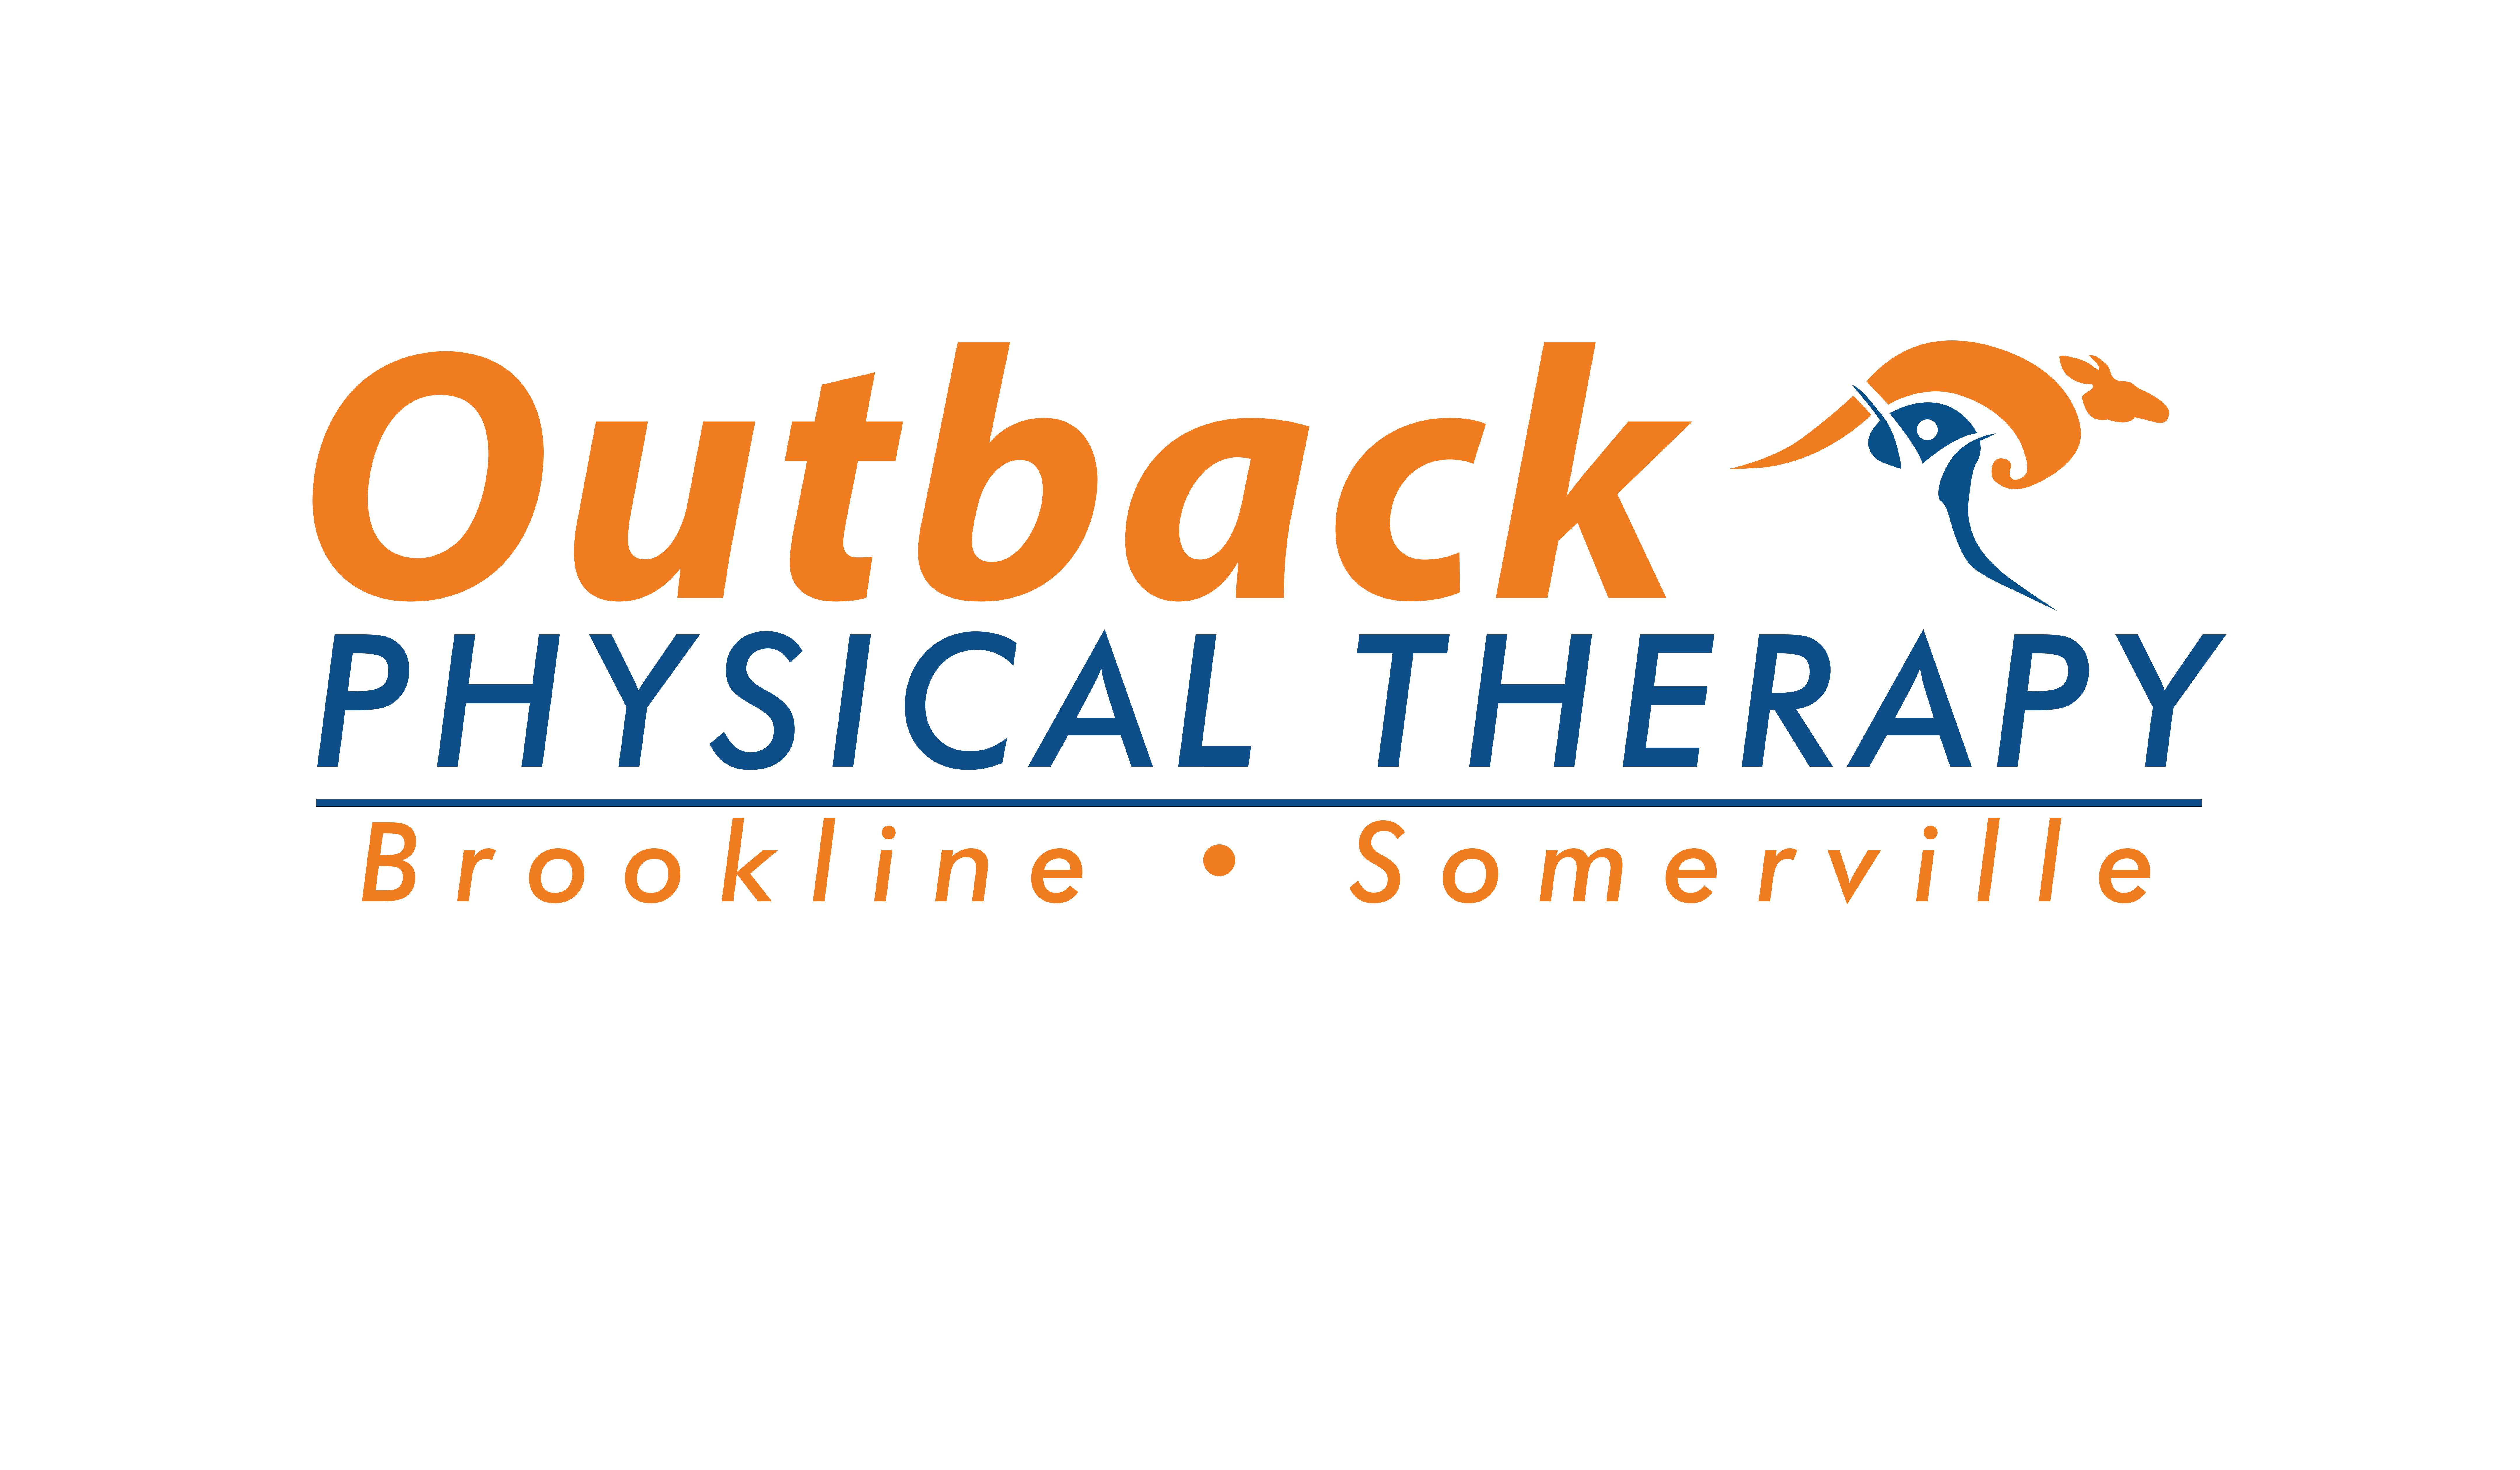 Outback Physical Therapy in  in Somerville, MA